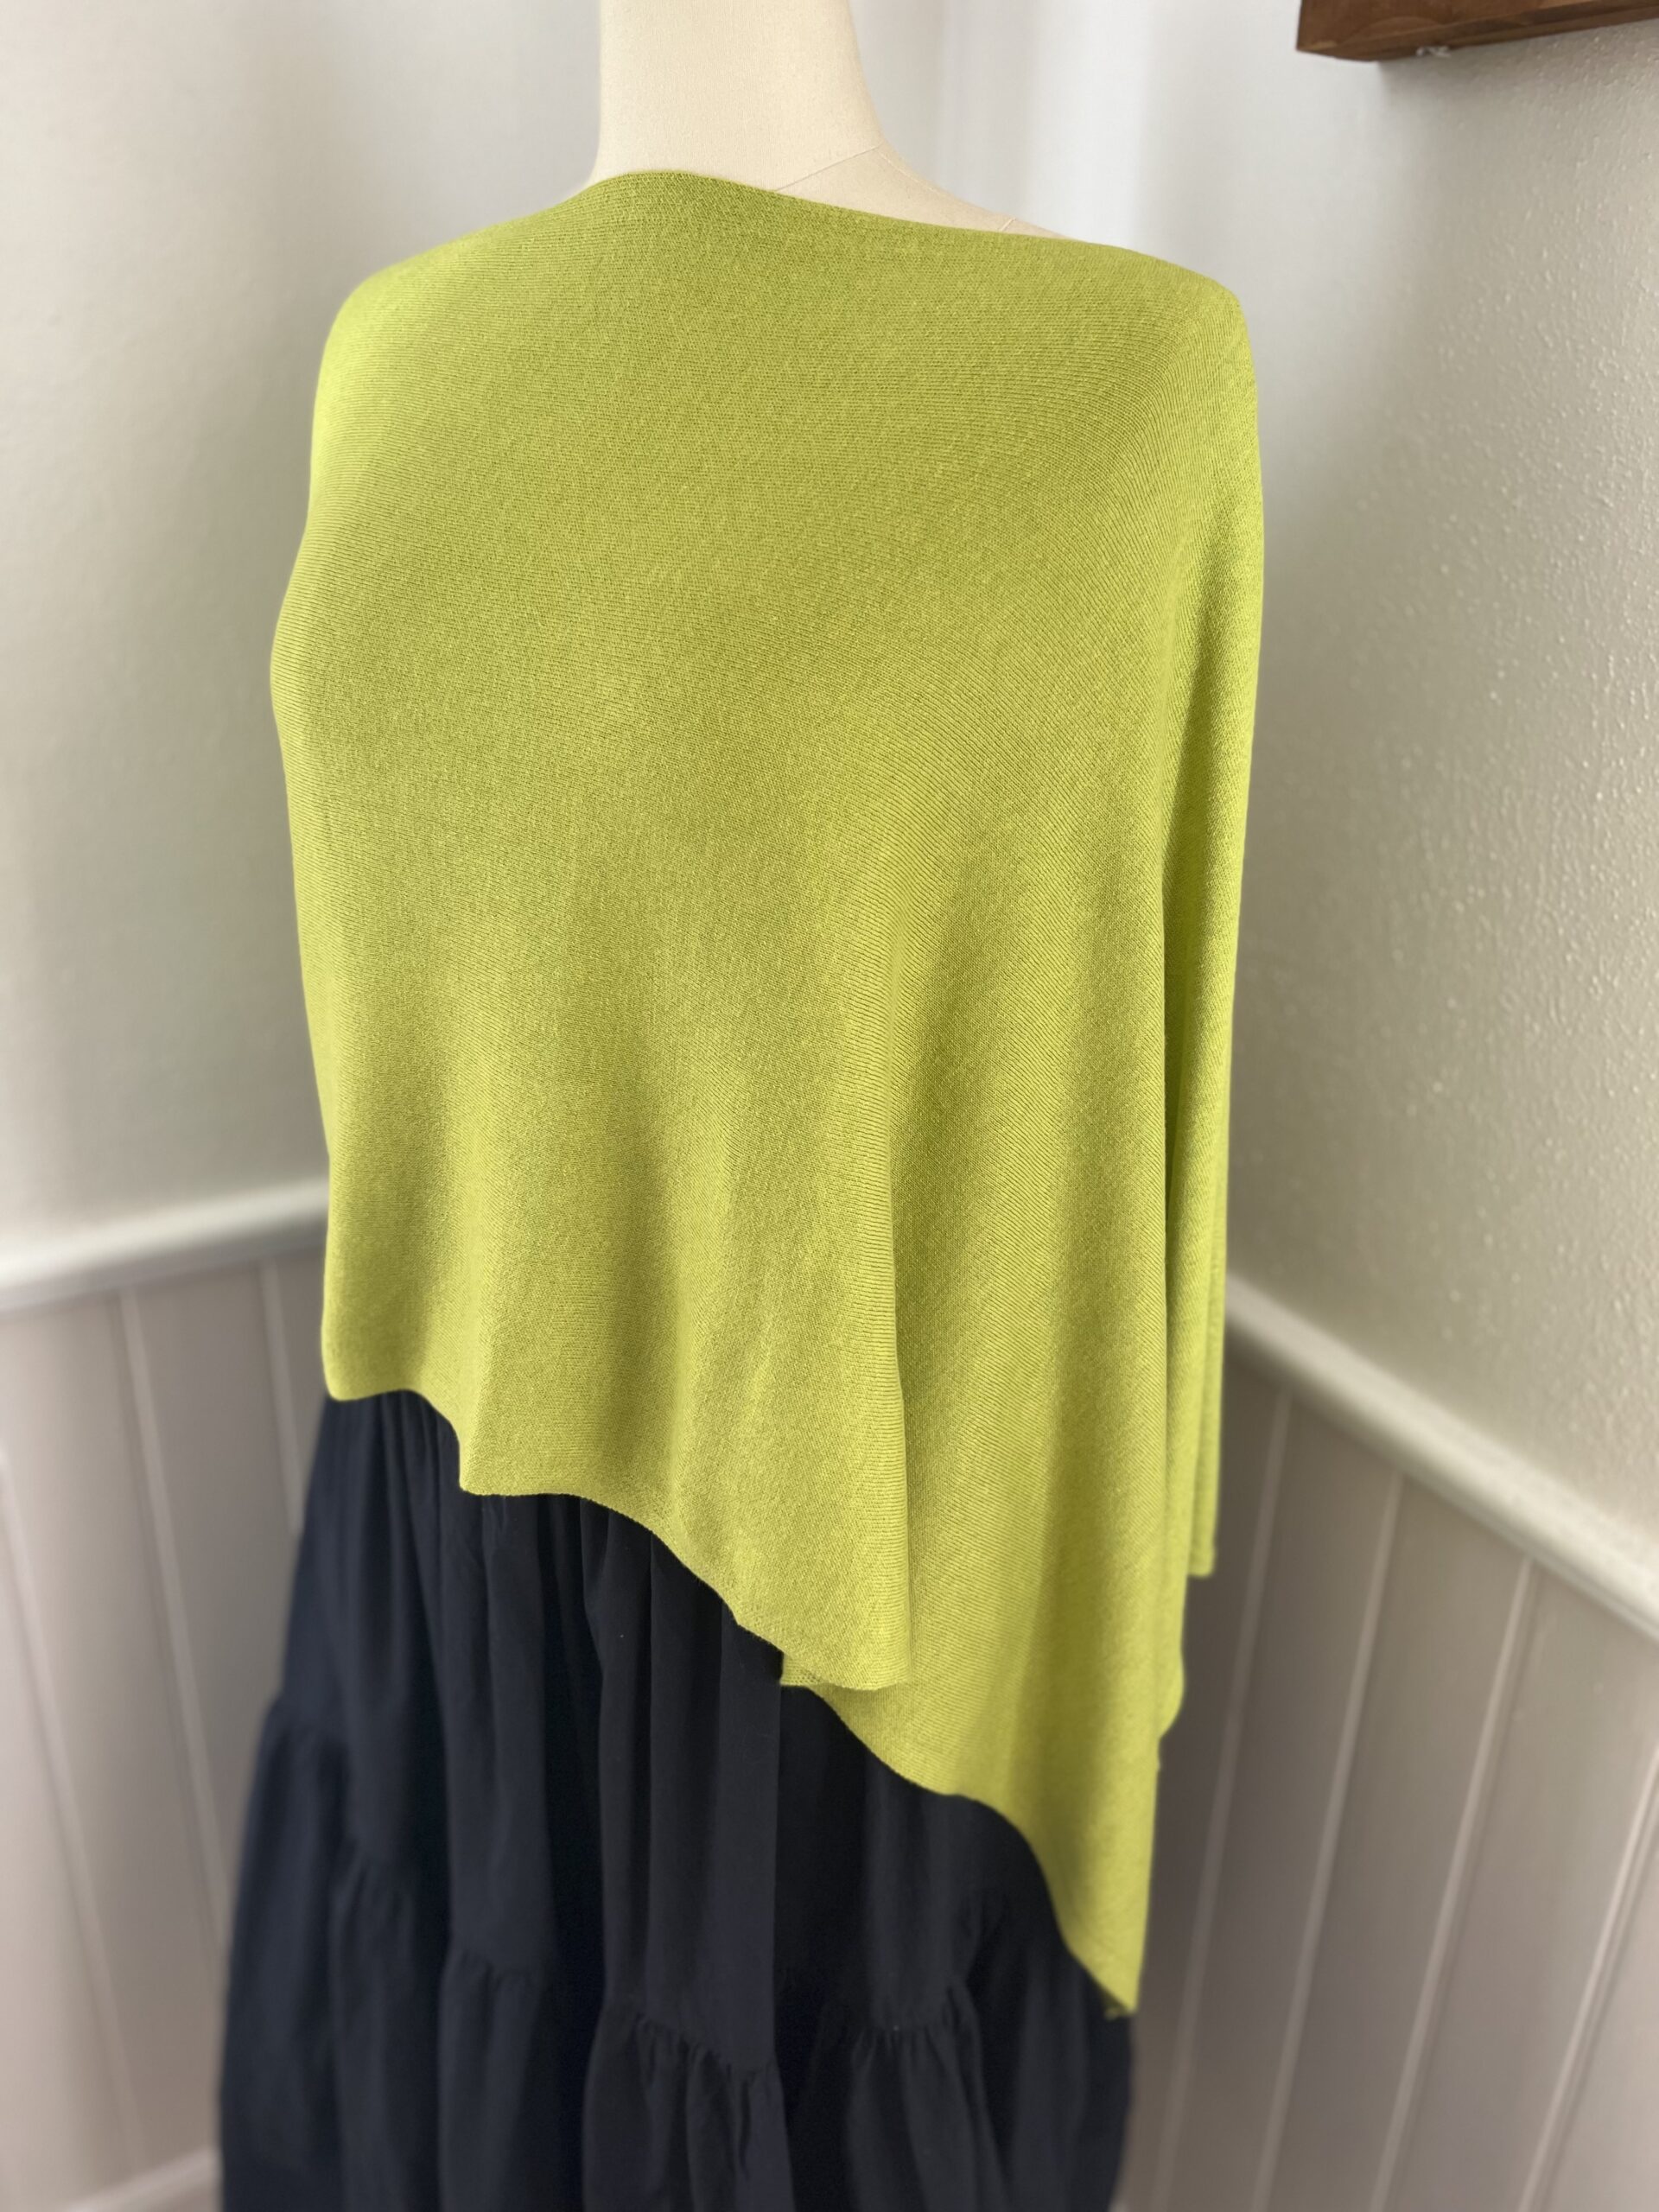 Alashan Cashmere Cotton Cashmere Trade Wind Dress Topper in Chartreuse 1908 Style LSC1501-1908